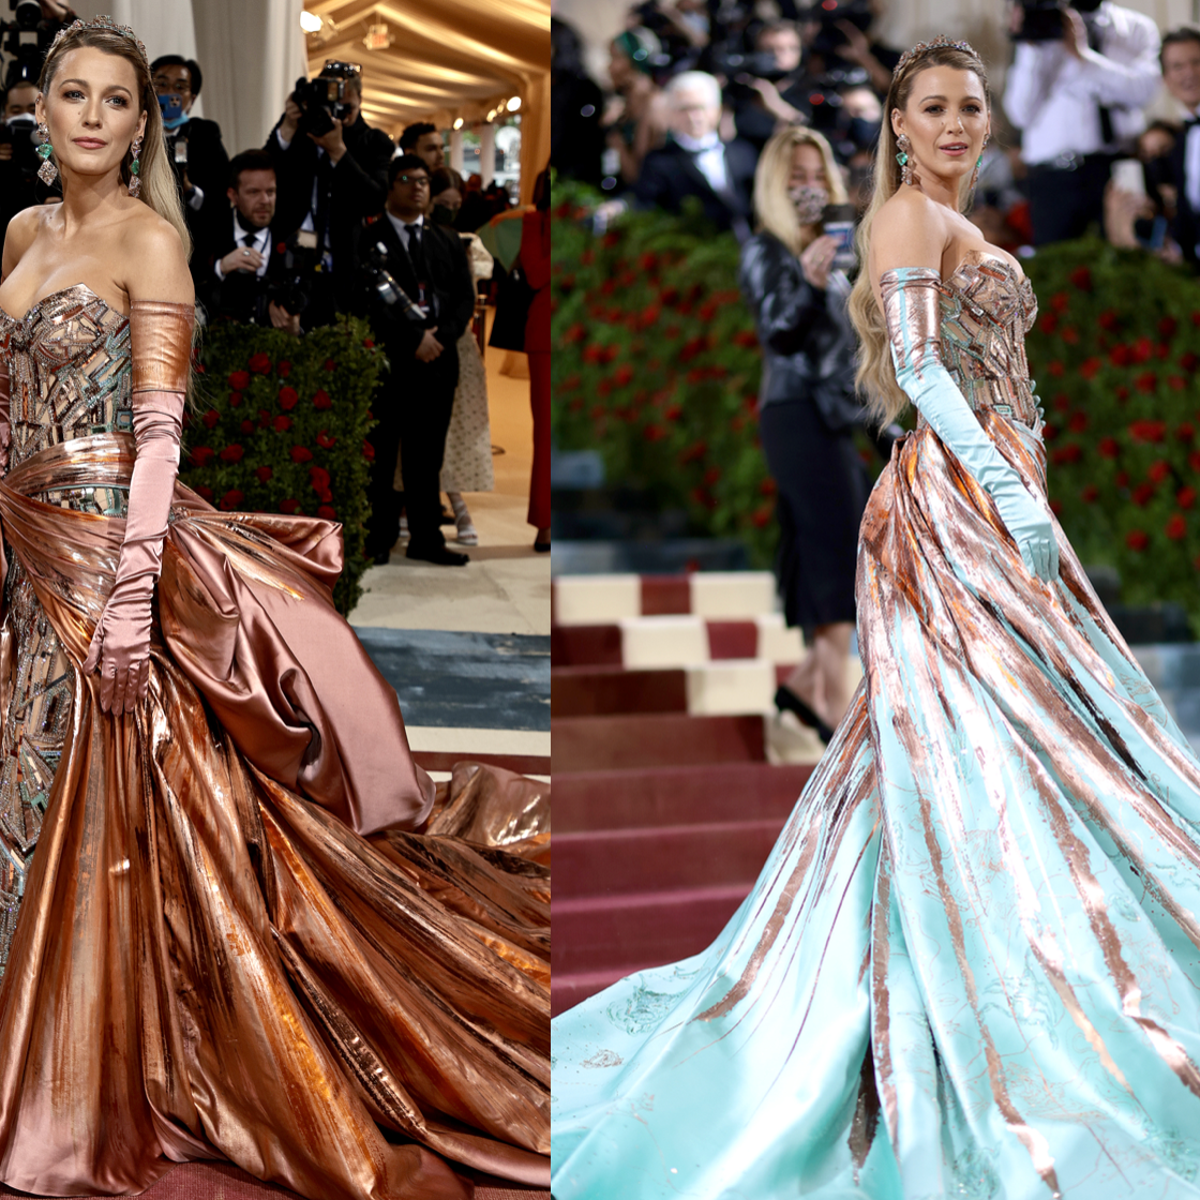 The best dressed stars from the 2022 Met Gala